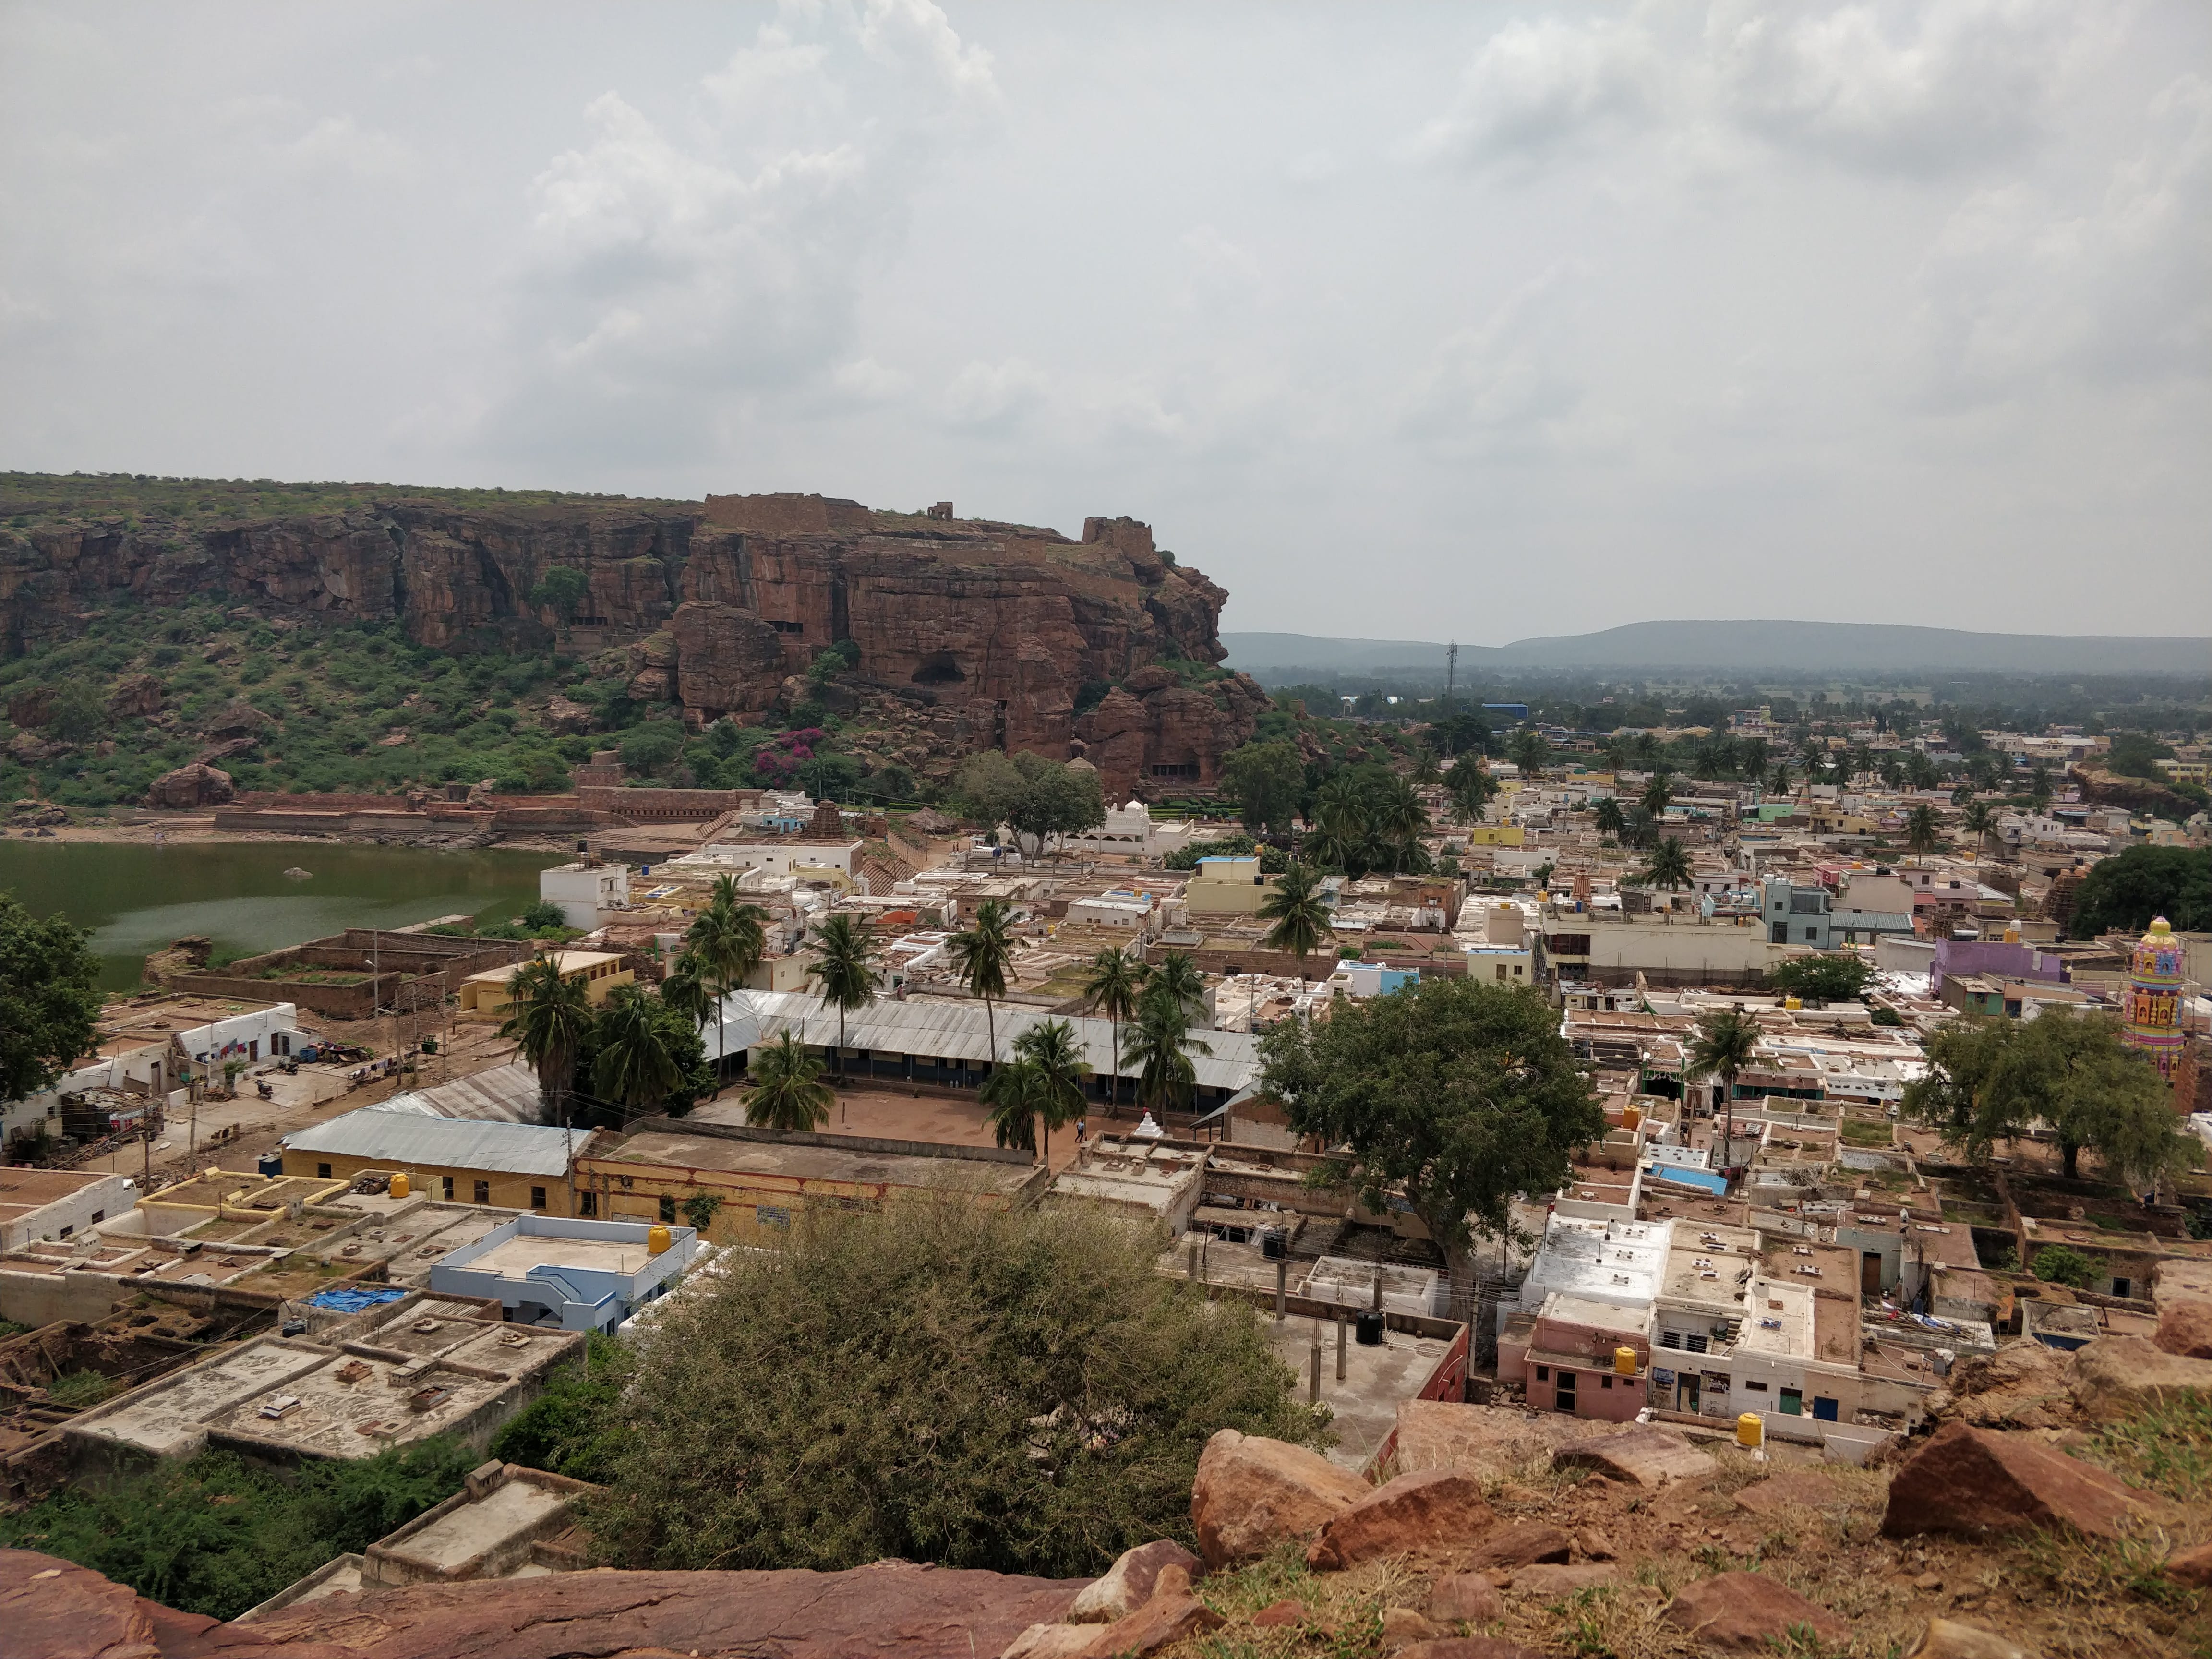 Badami town and the southern hill which houses the caves